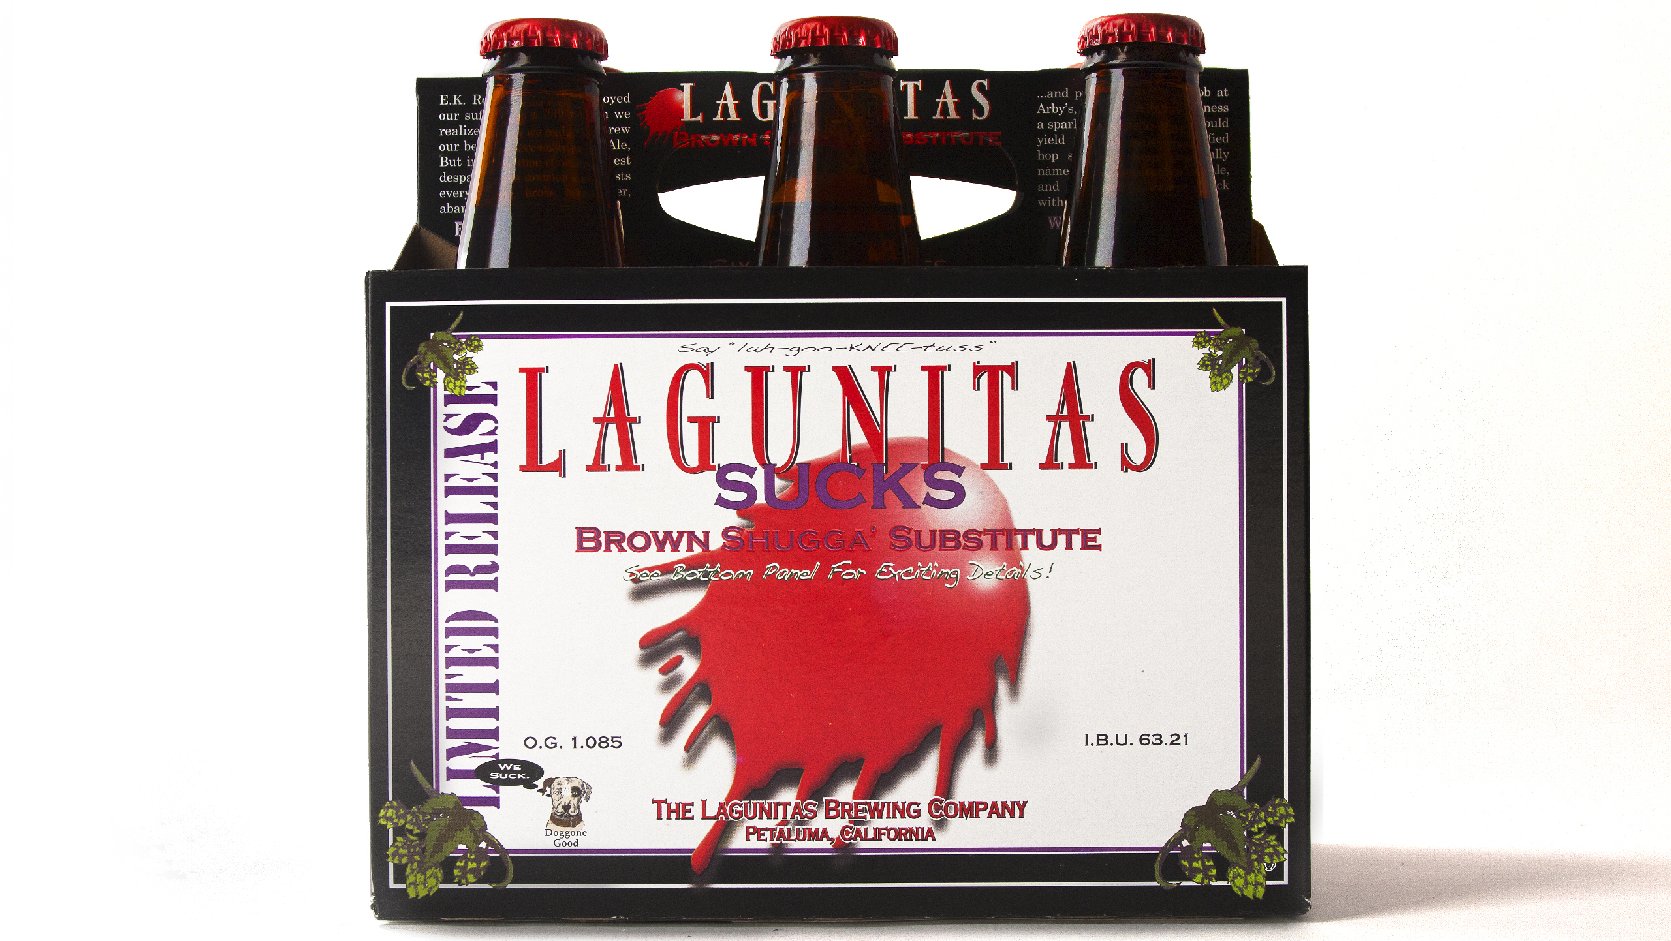 Lagunitas Brewing Company's owners are nervous that the Russian River water they currently use to make beer could run out in the drought that's hammering California. Photo: Courtesy of Lagunitas Brewing Company